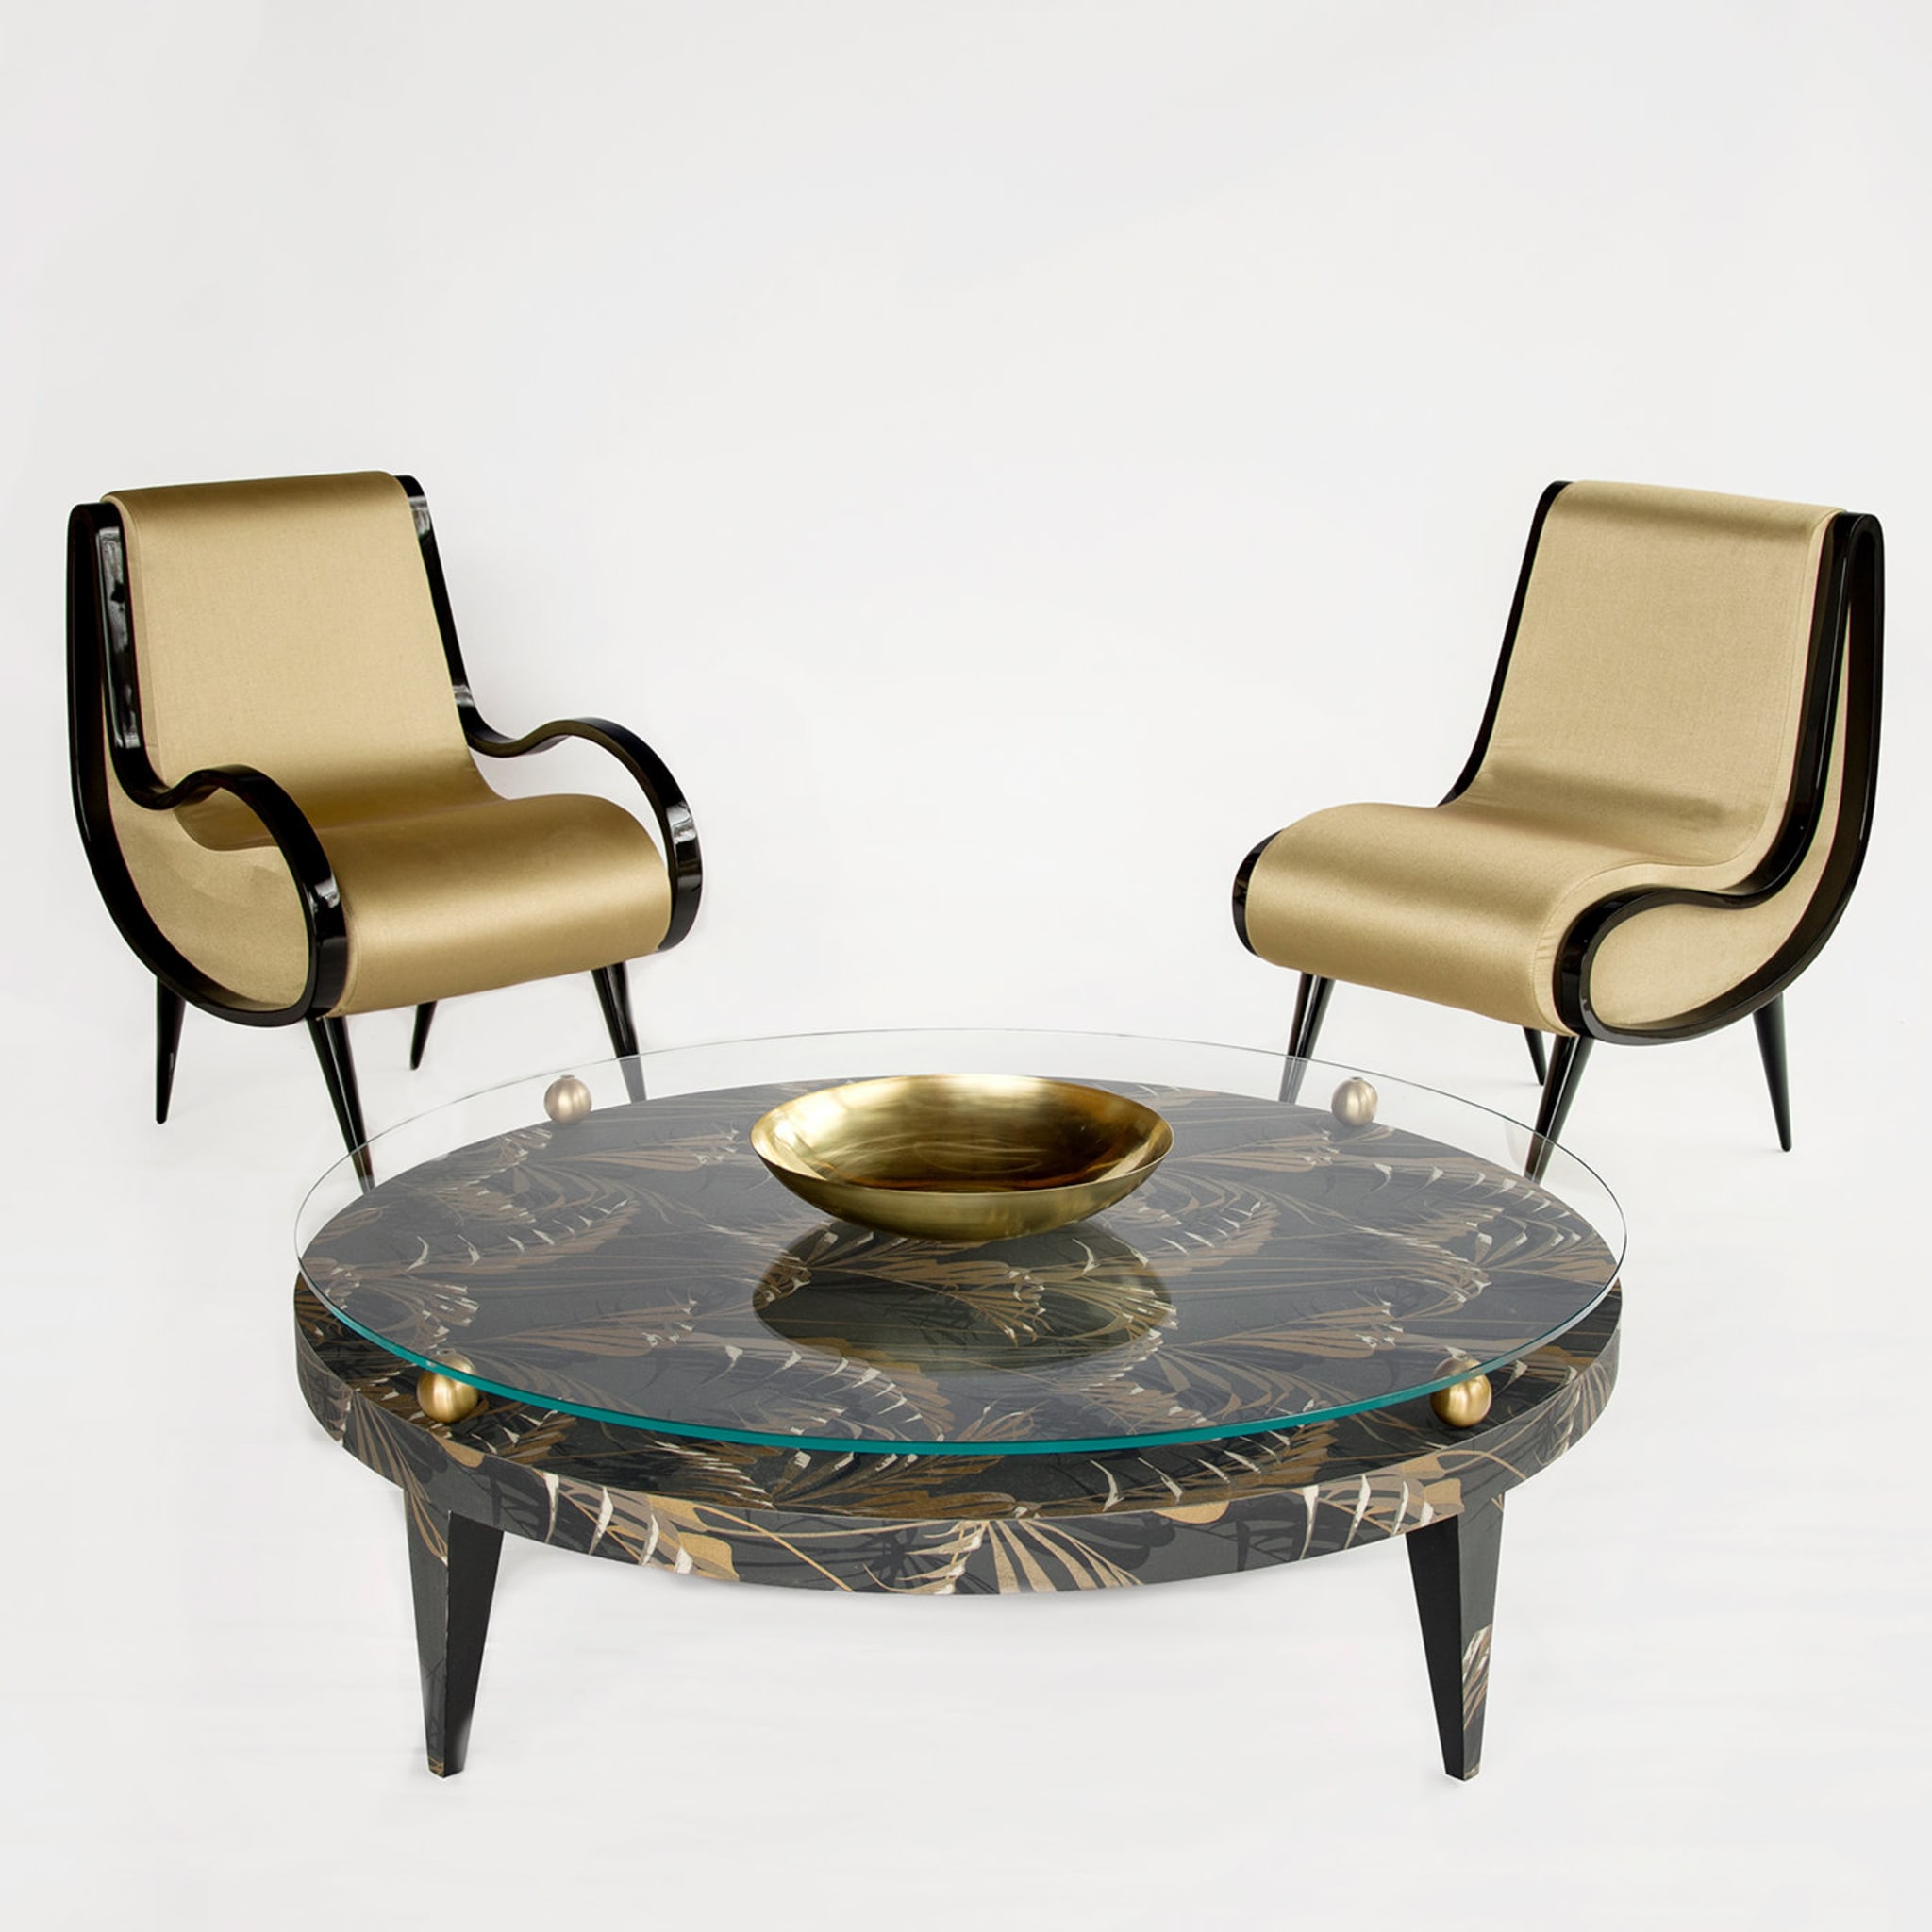 Eclipse Chair in gold fabric - Alternative view 1